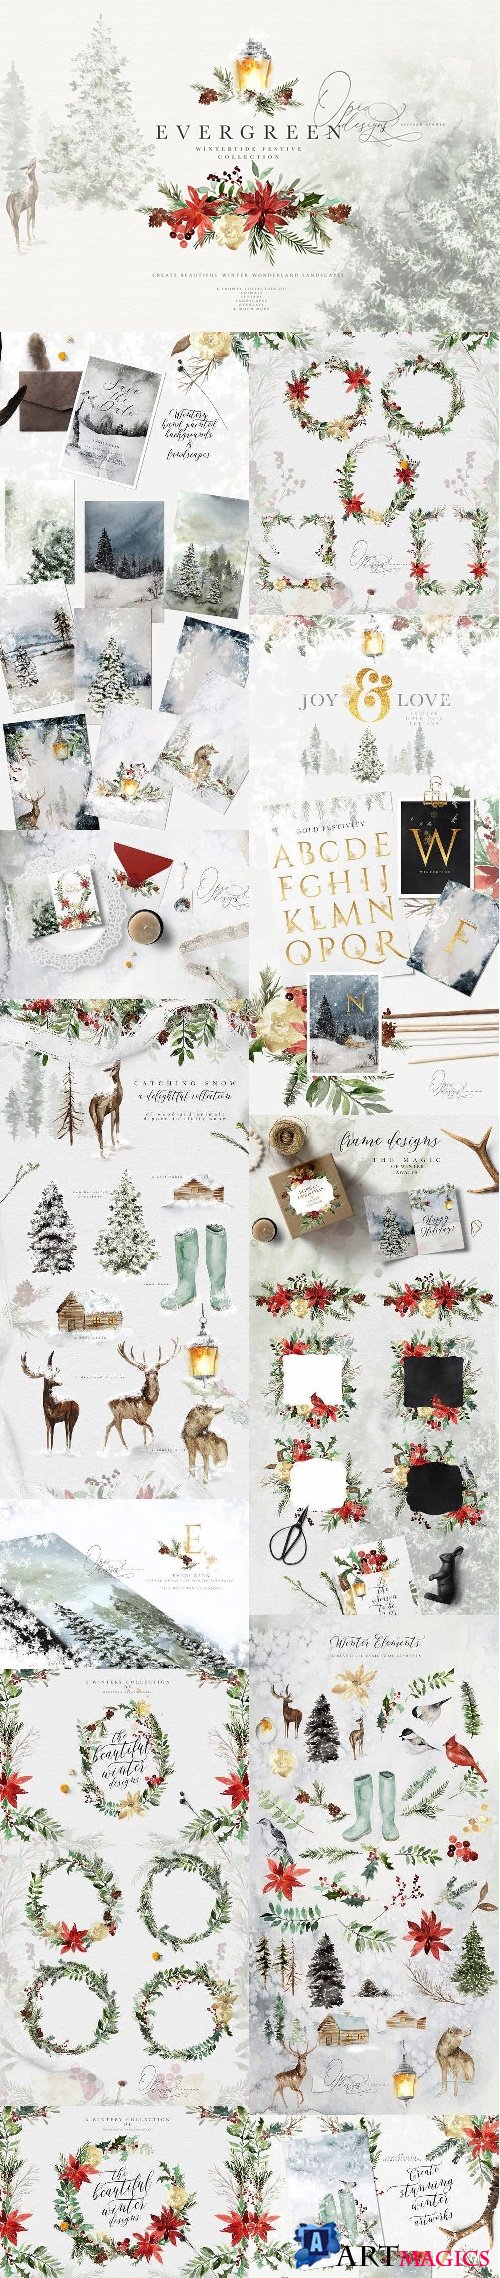 Evergreen - Wintertide Collection - 2961321